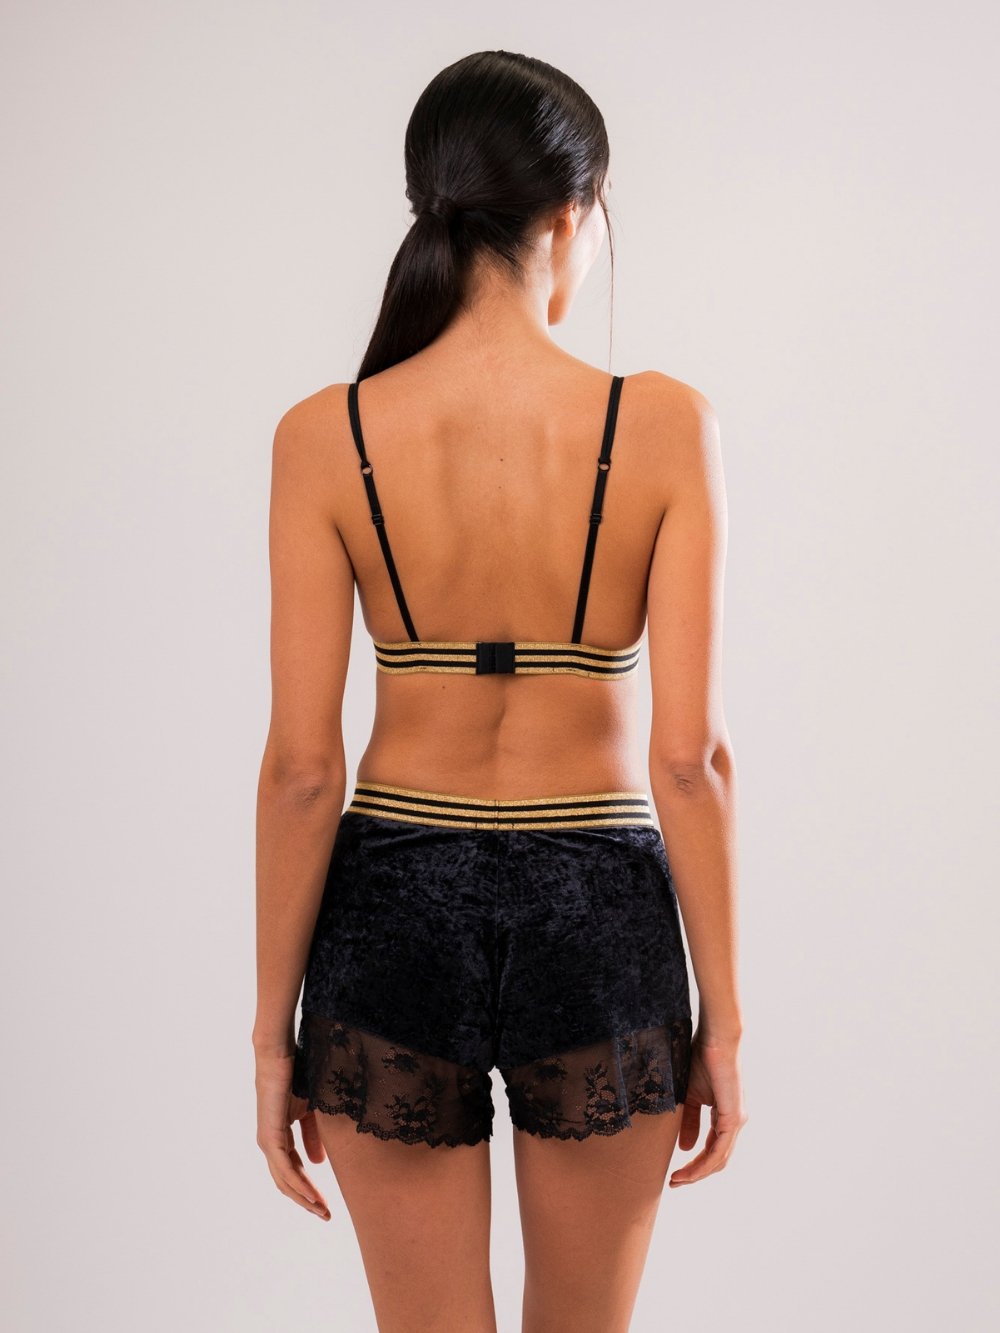 Shorts Velluto Nero - Carami - Caramì Lingerie & Activewear Made in Italy